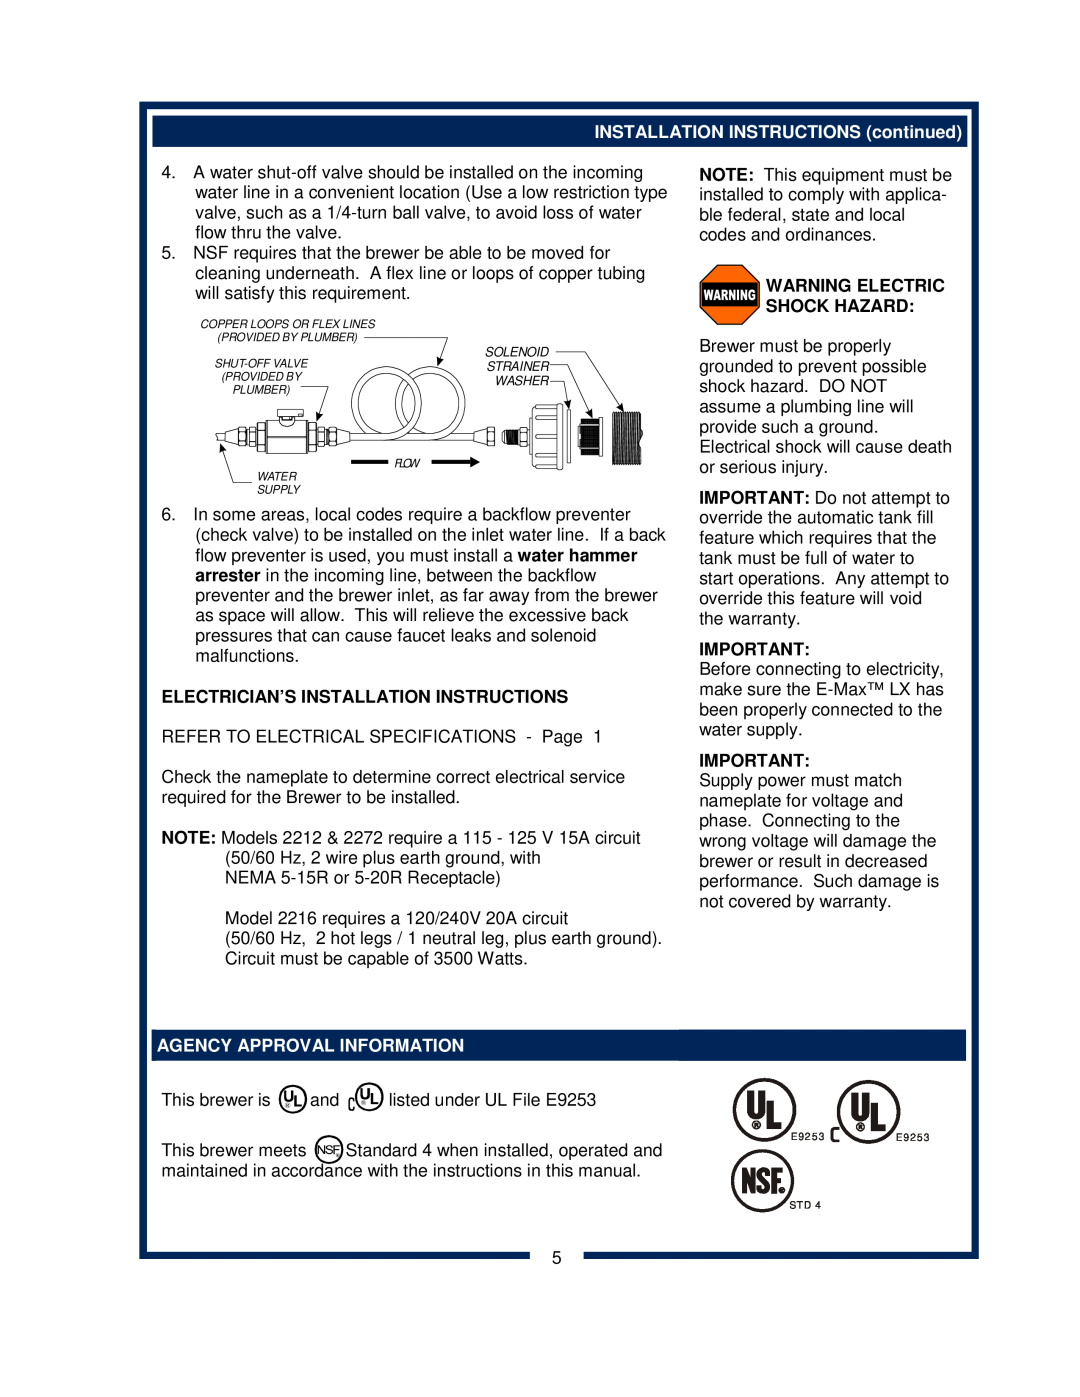 Bloomfield 2286EX, 2288EX INSTALLATION INSTRUCTIONS continued, Agency Approval Information, Warning Electric Shock Hazard 